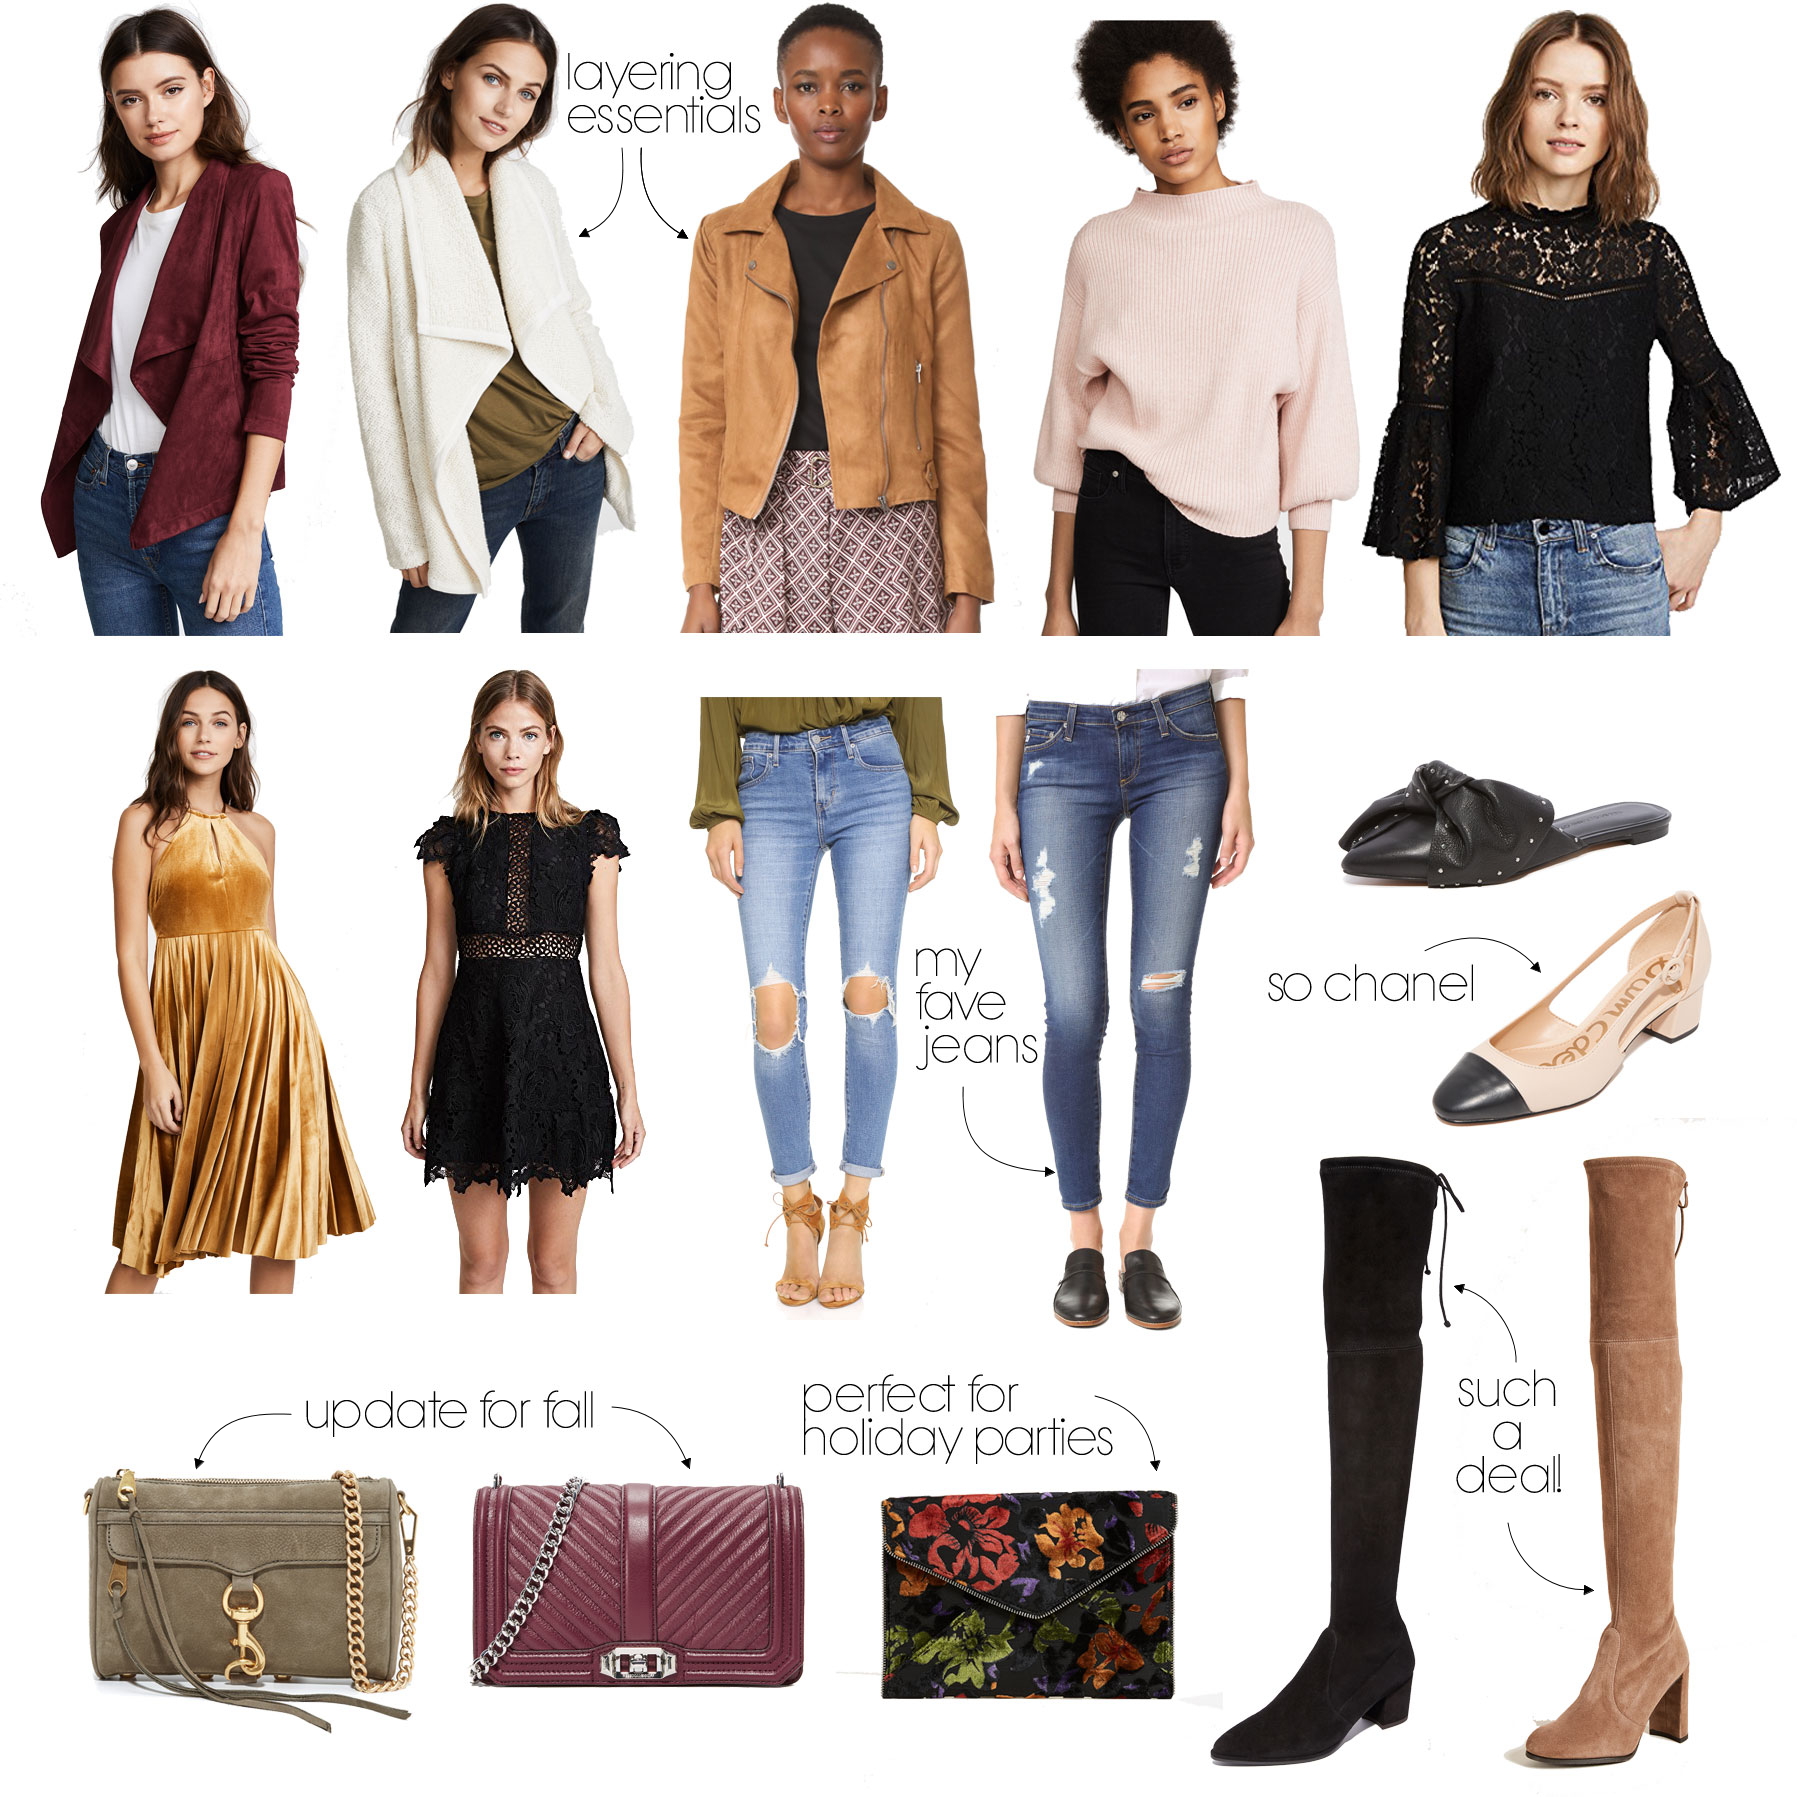 shopbop sale picks - Big Yearly Shopbop Sale: What I Own + Recommend by Dallas fashion blogger cute & little